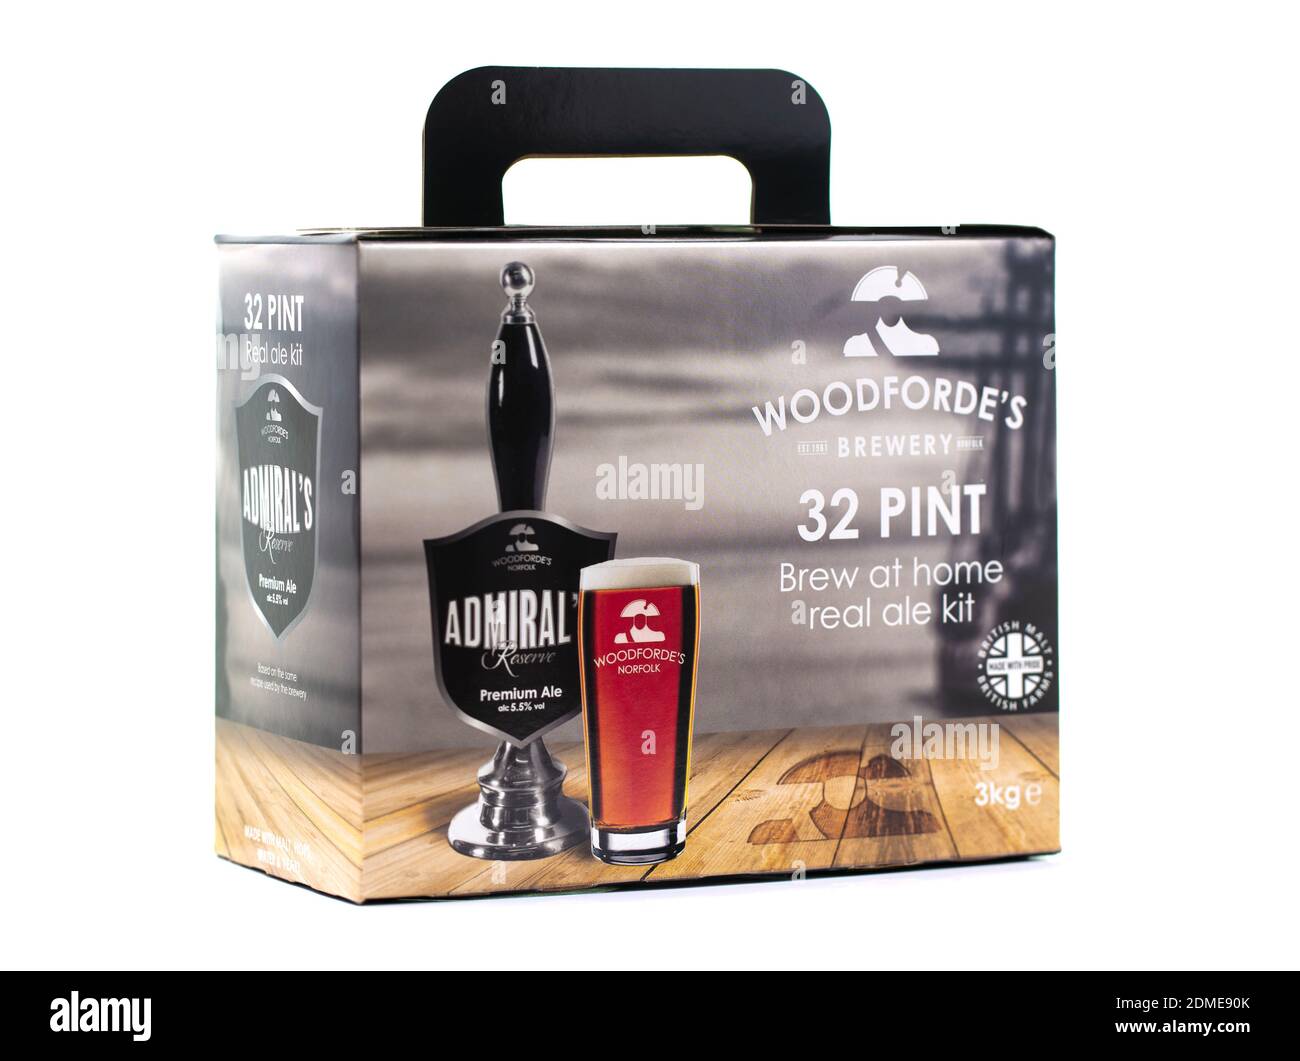 SWINDON, UK - DECEMBER 3, 2020: Woodfordes Admirals Reserve Real Ale Kit to brew at home on a white background. Stock Photo